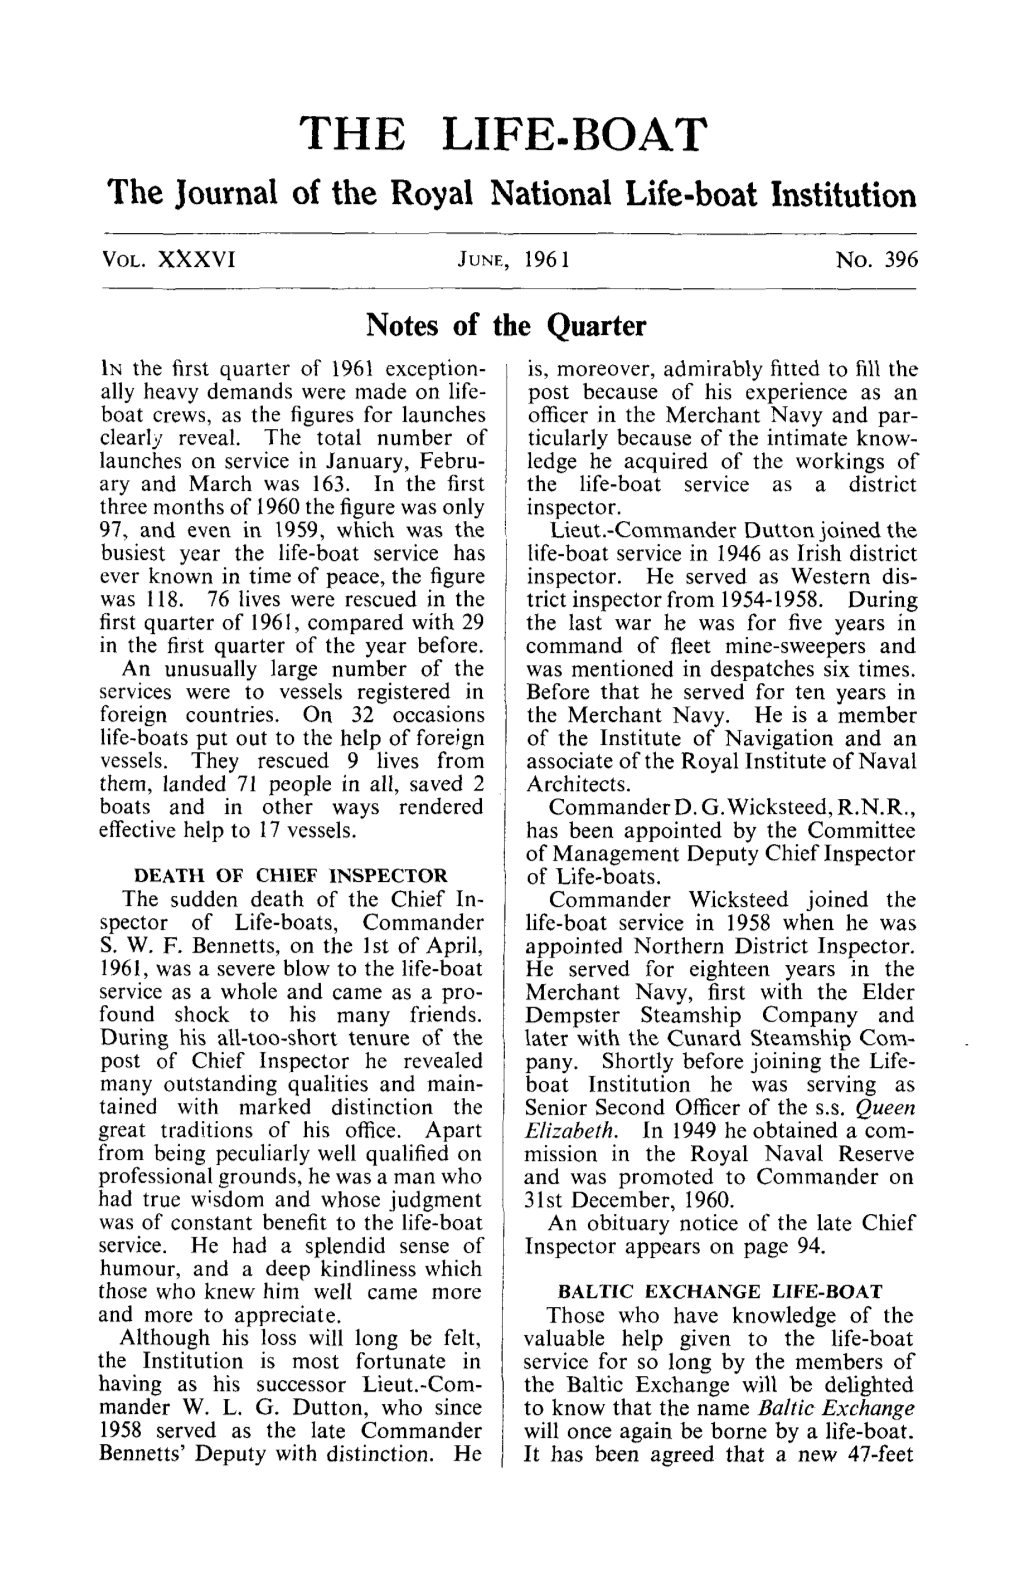 THE LIFE-BOAT the Journal of the Royal National Life-Boat Institution